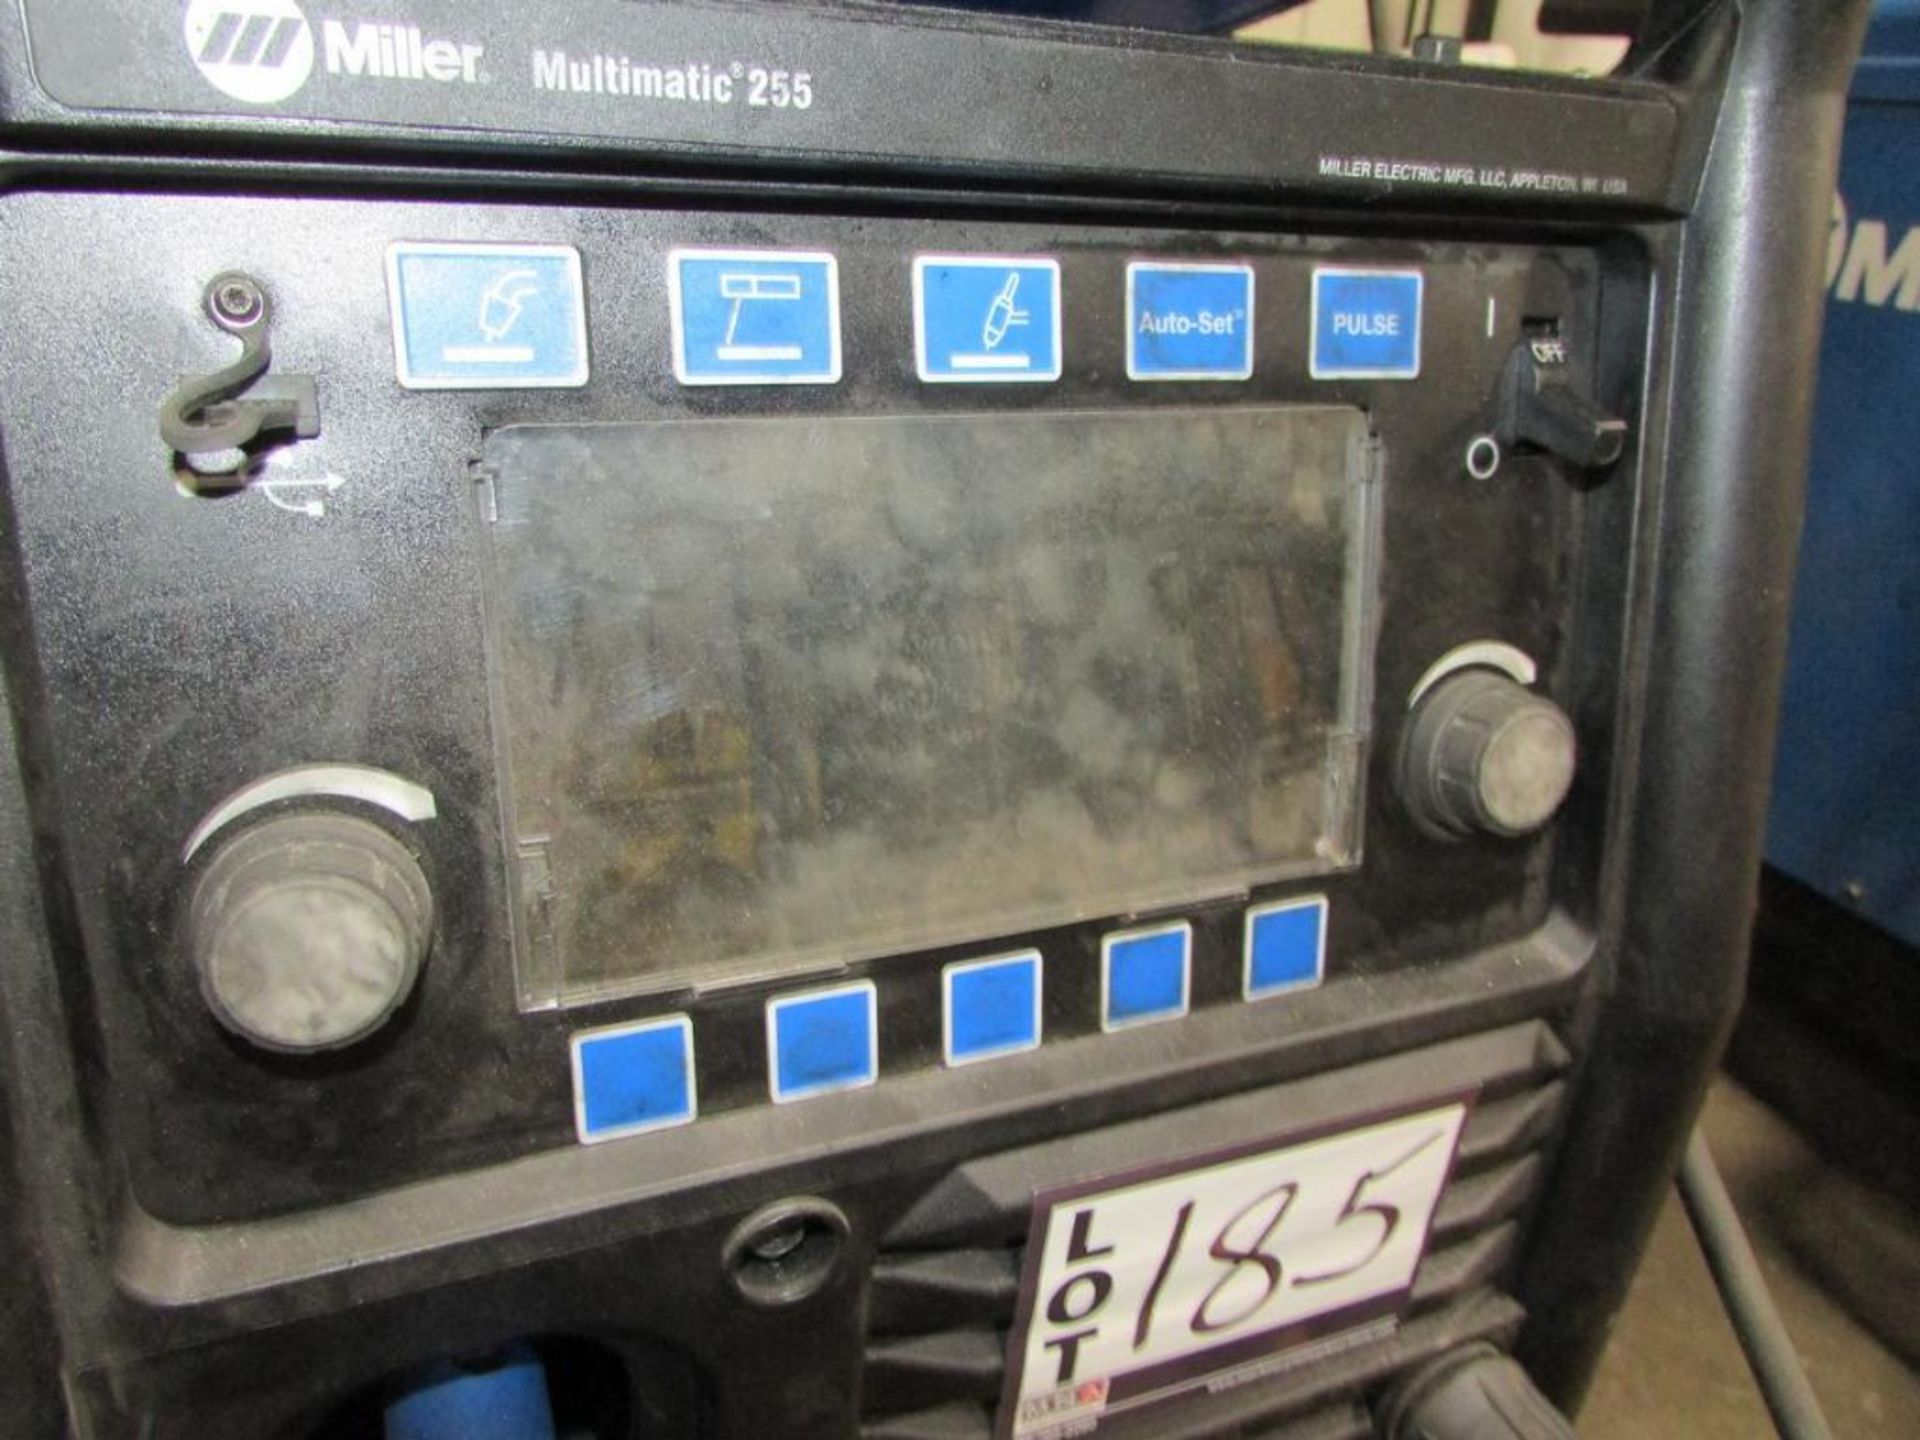 Miller Multimatic 255, Multi Process Welding Power Source, with Internal Wire Feeder, Welding Clamp, - Image 2 of 10